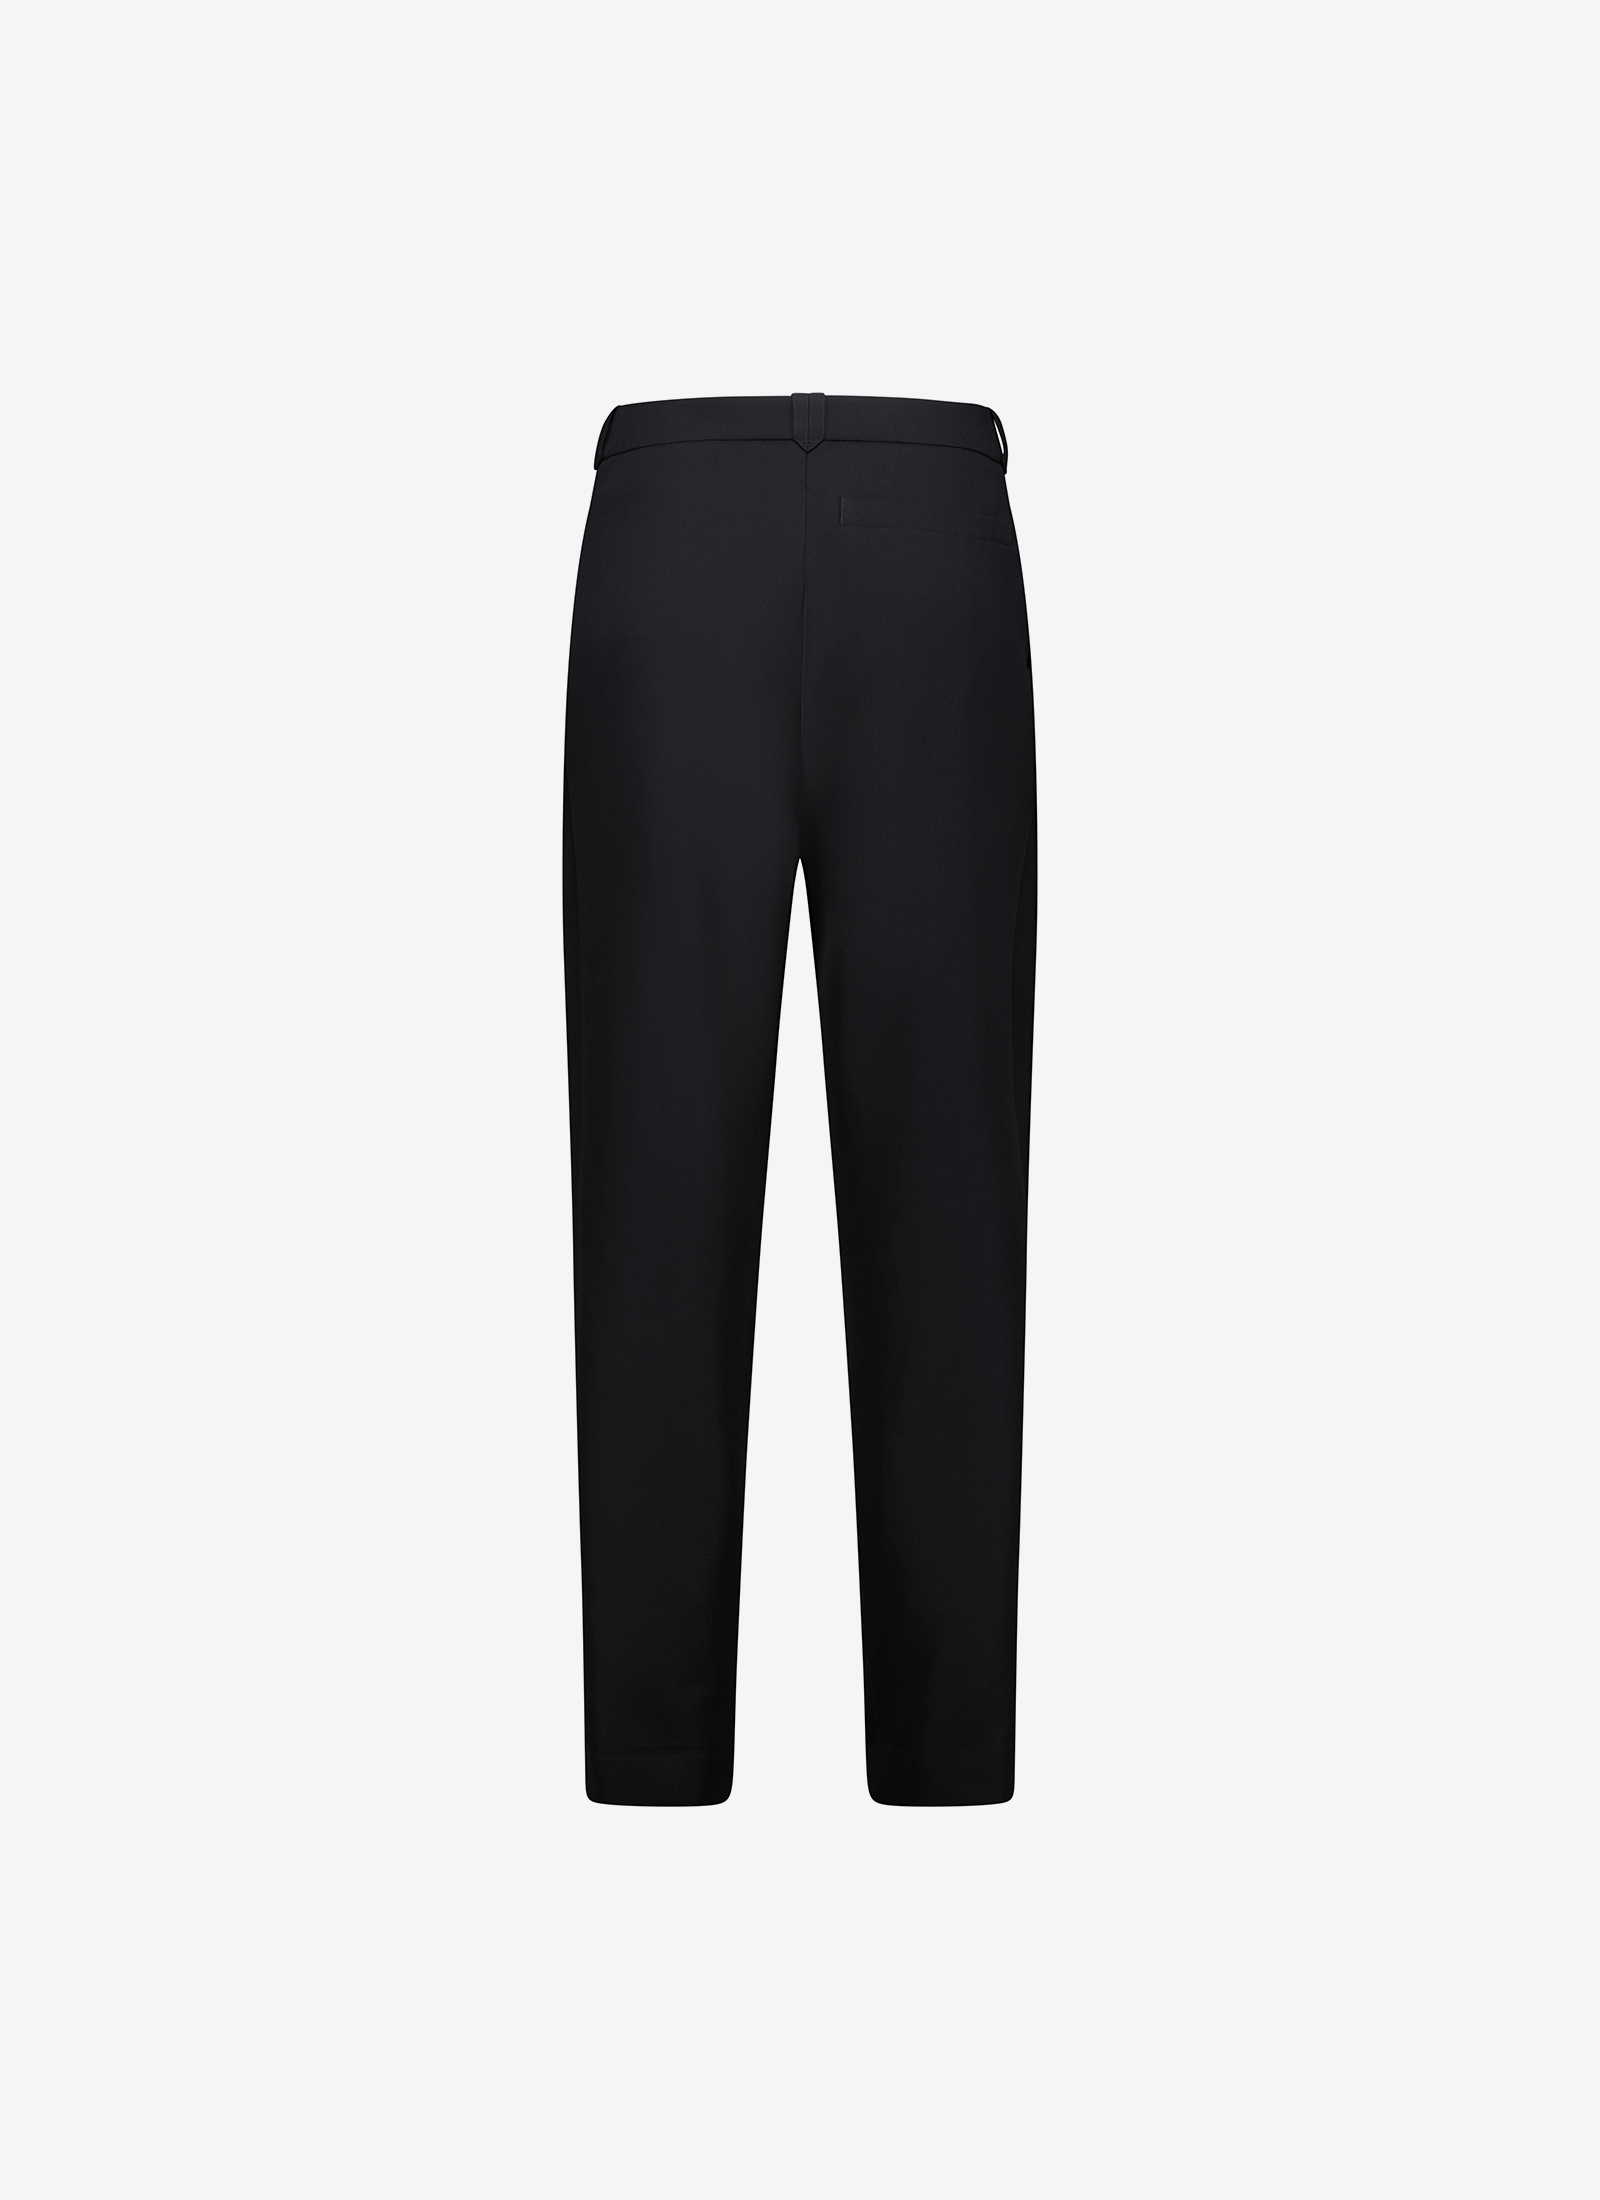 Remy Pant in Black